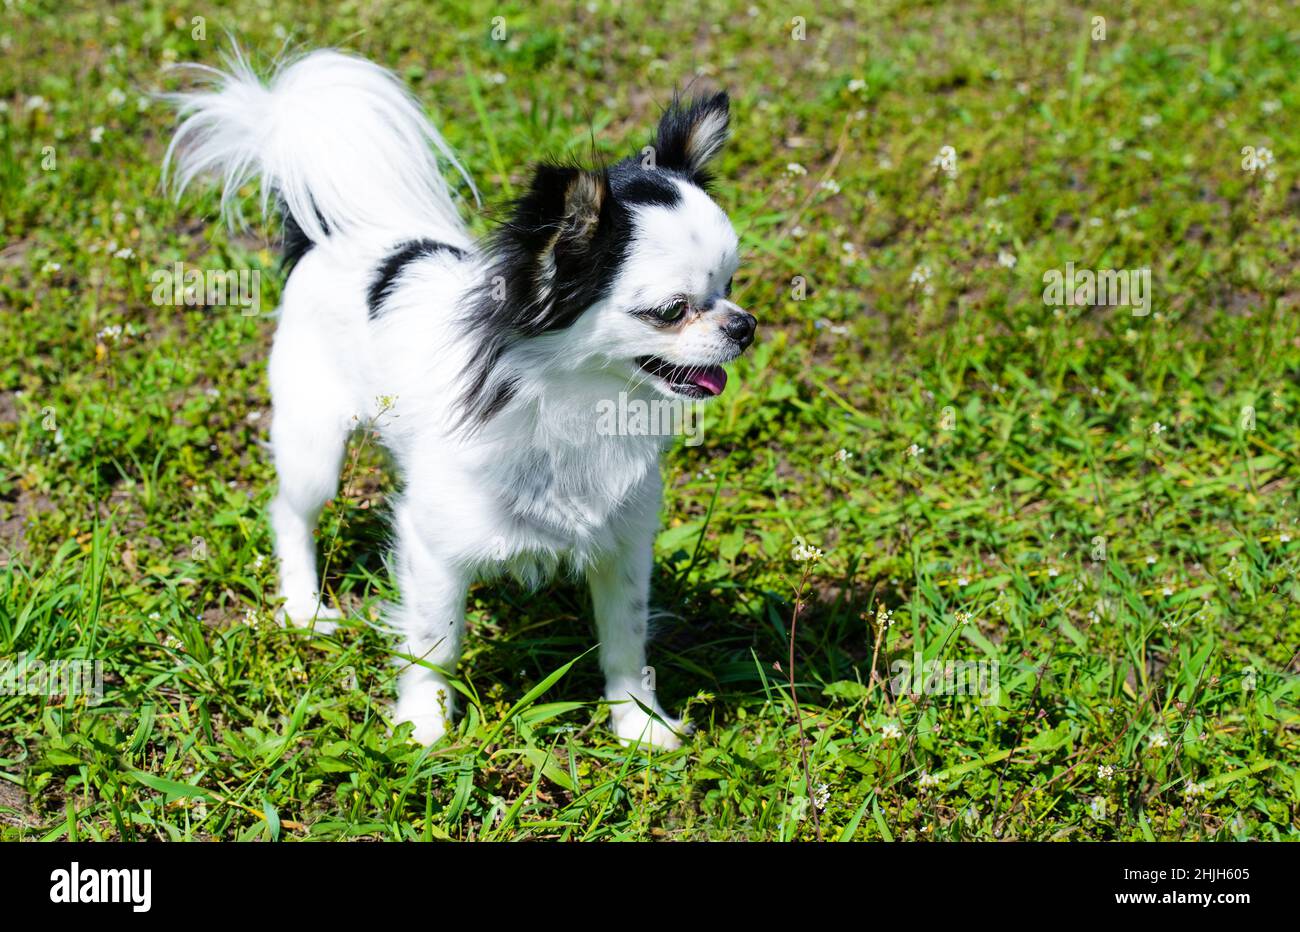 Chihuahua Long Coat.  The Chihuahua Long Coat stands on the grass. Stock Photo